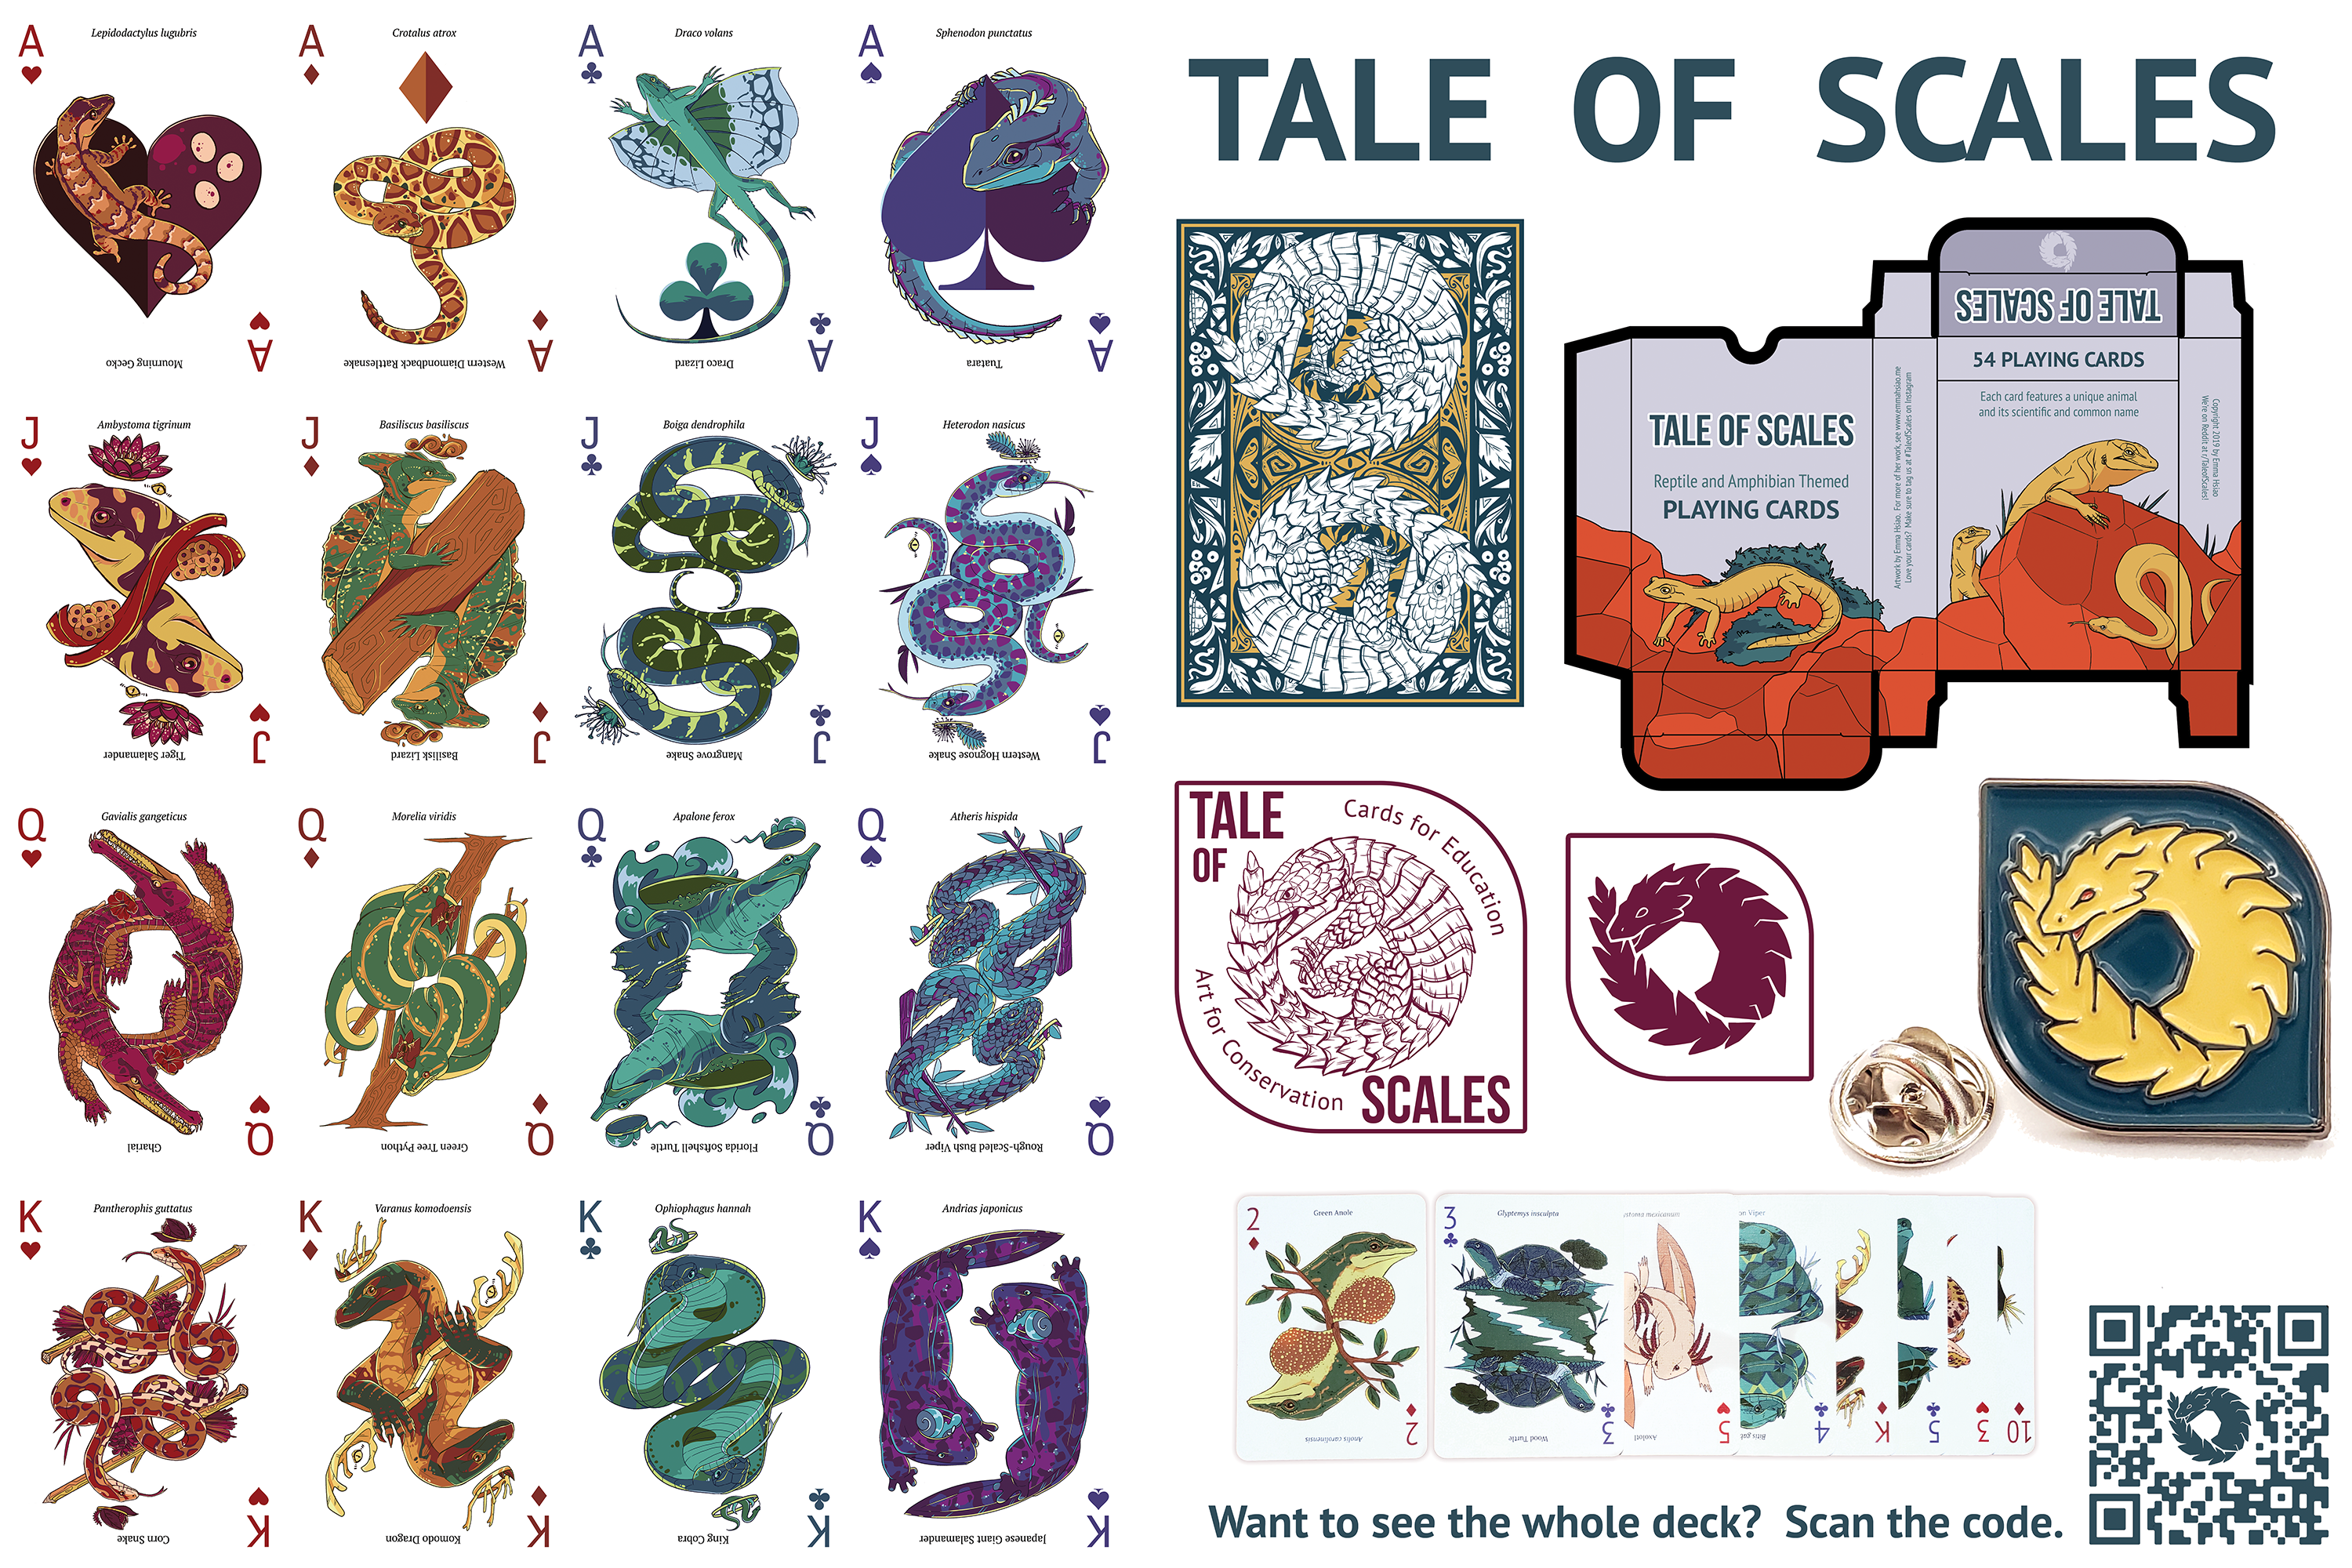 Tale of Scales